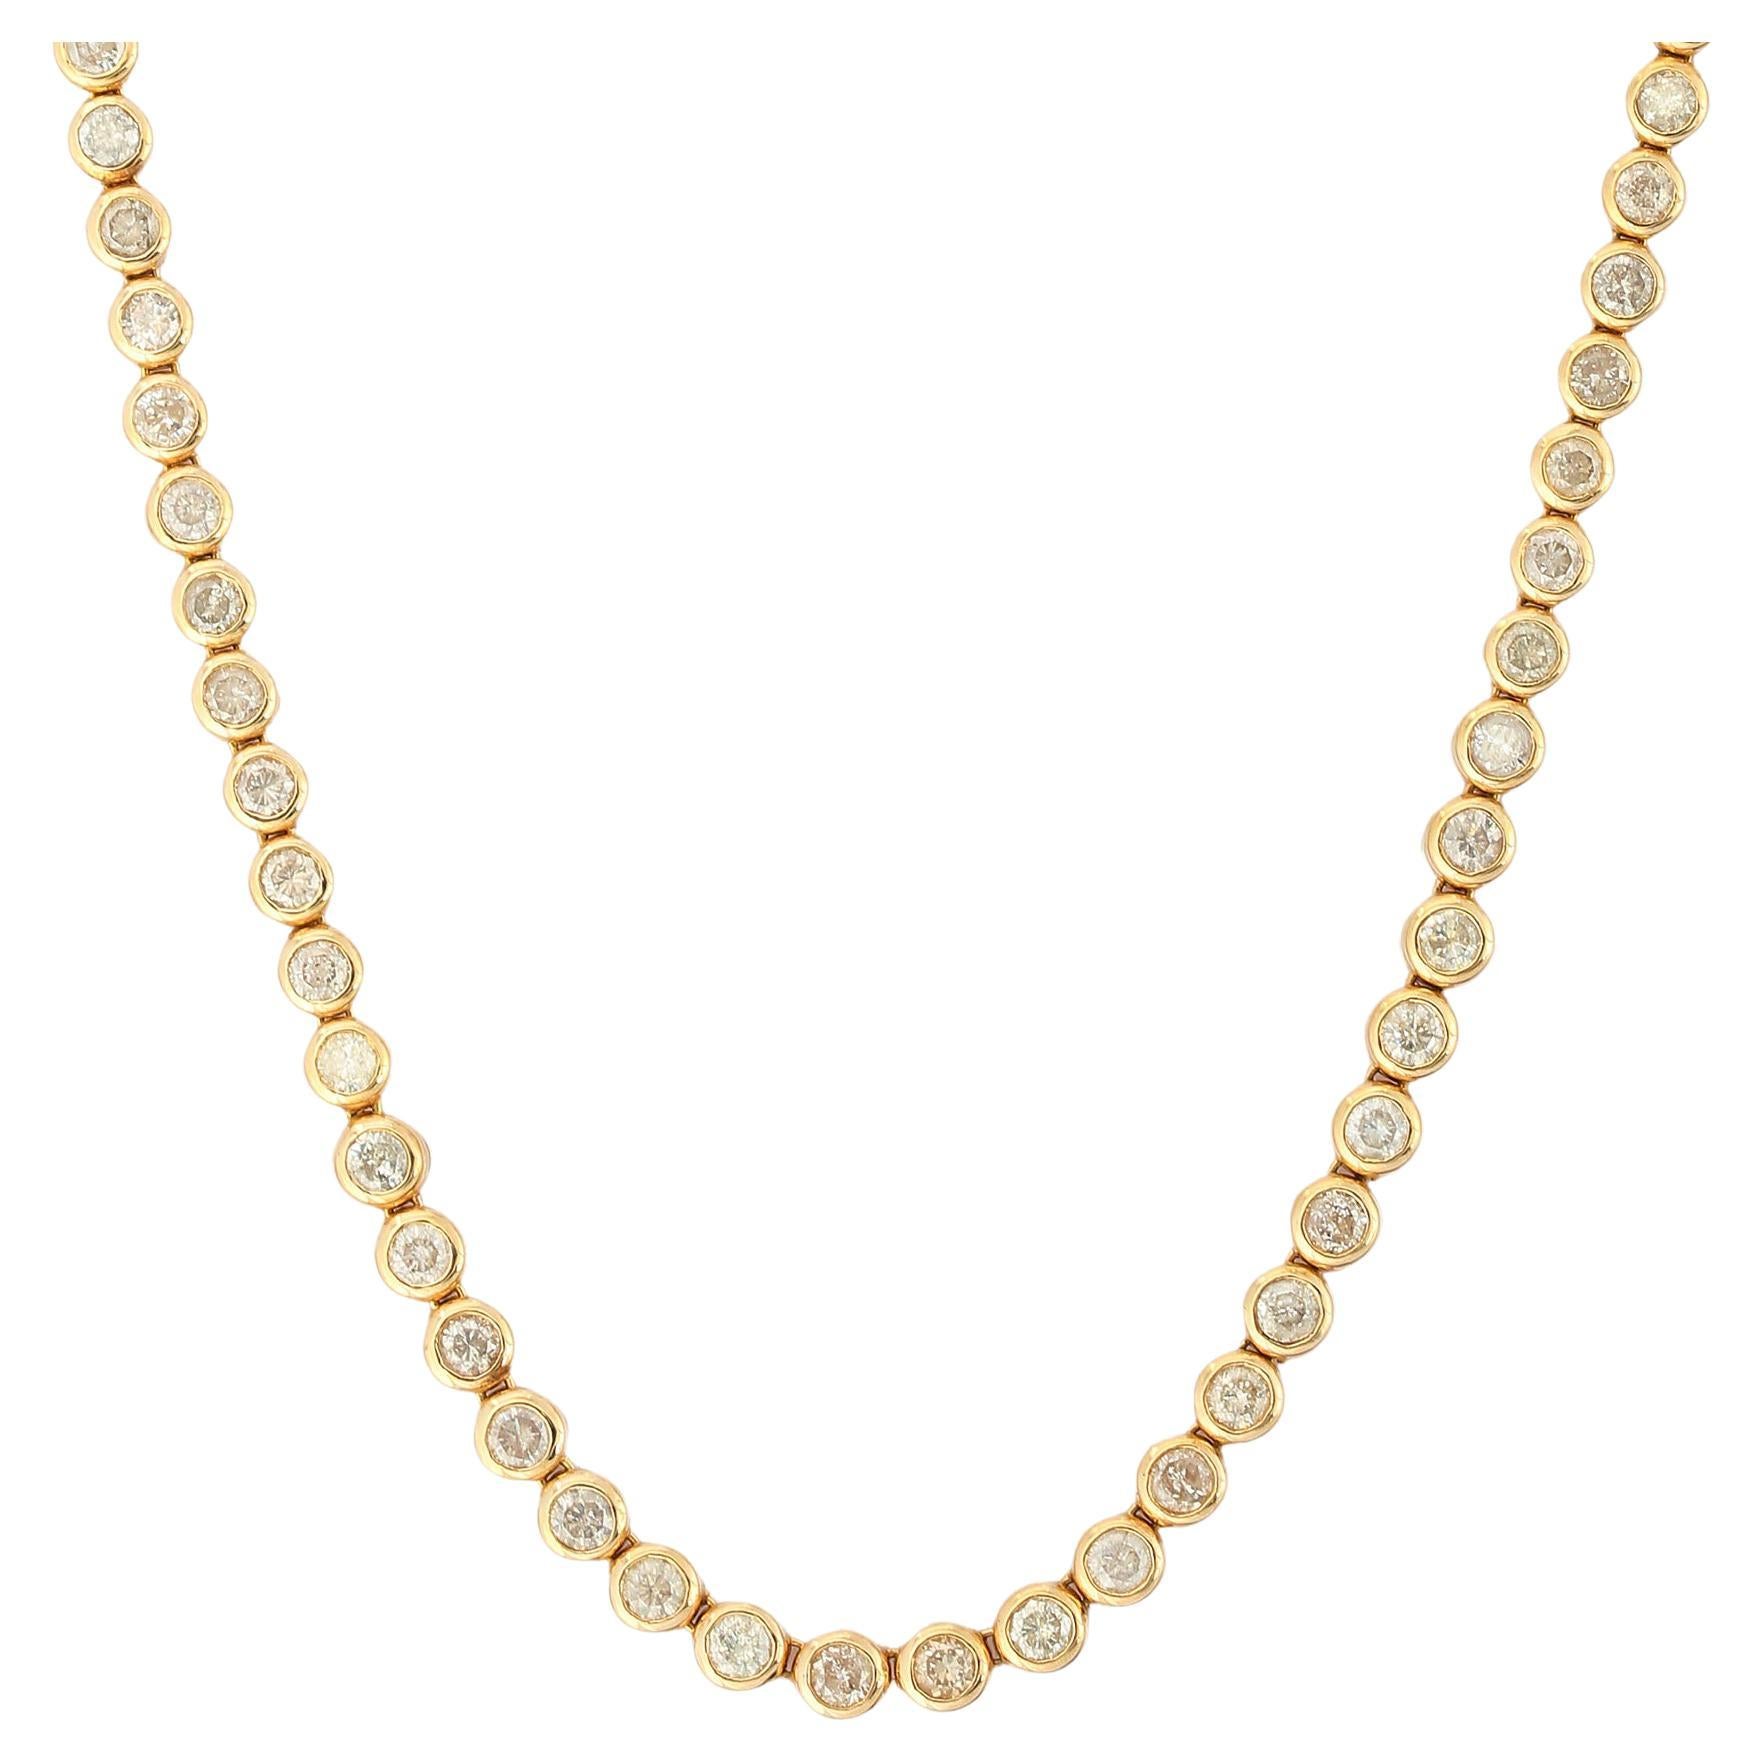 18K Yellow Gold 7.35 Carat Diamond Tennis Necklace Gift for Mom